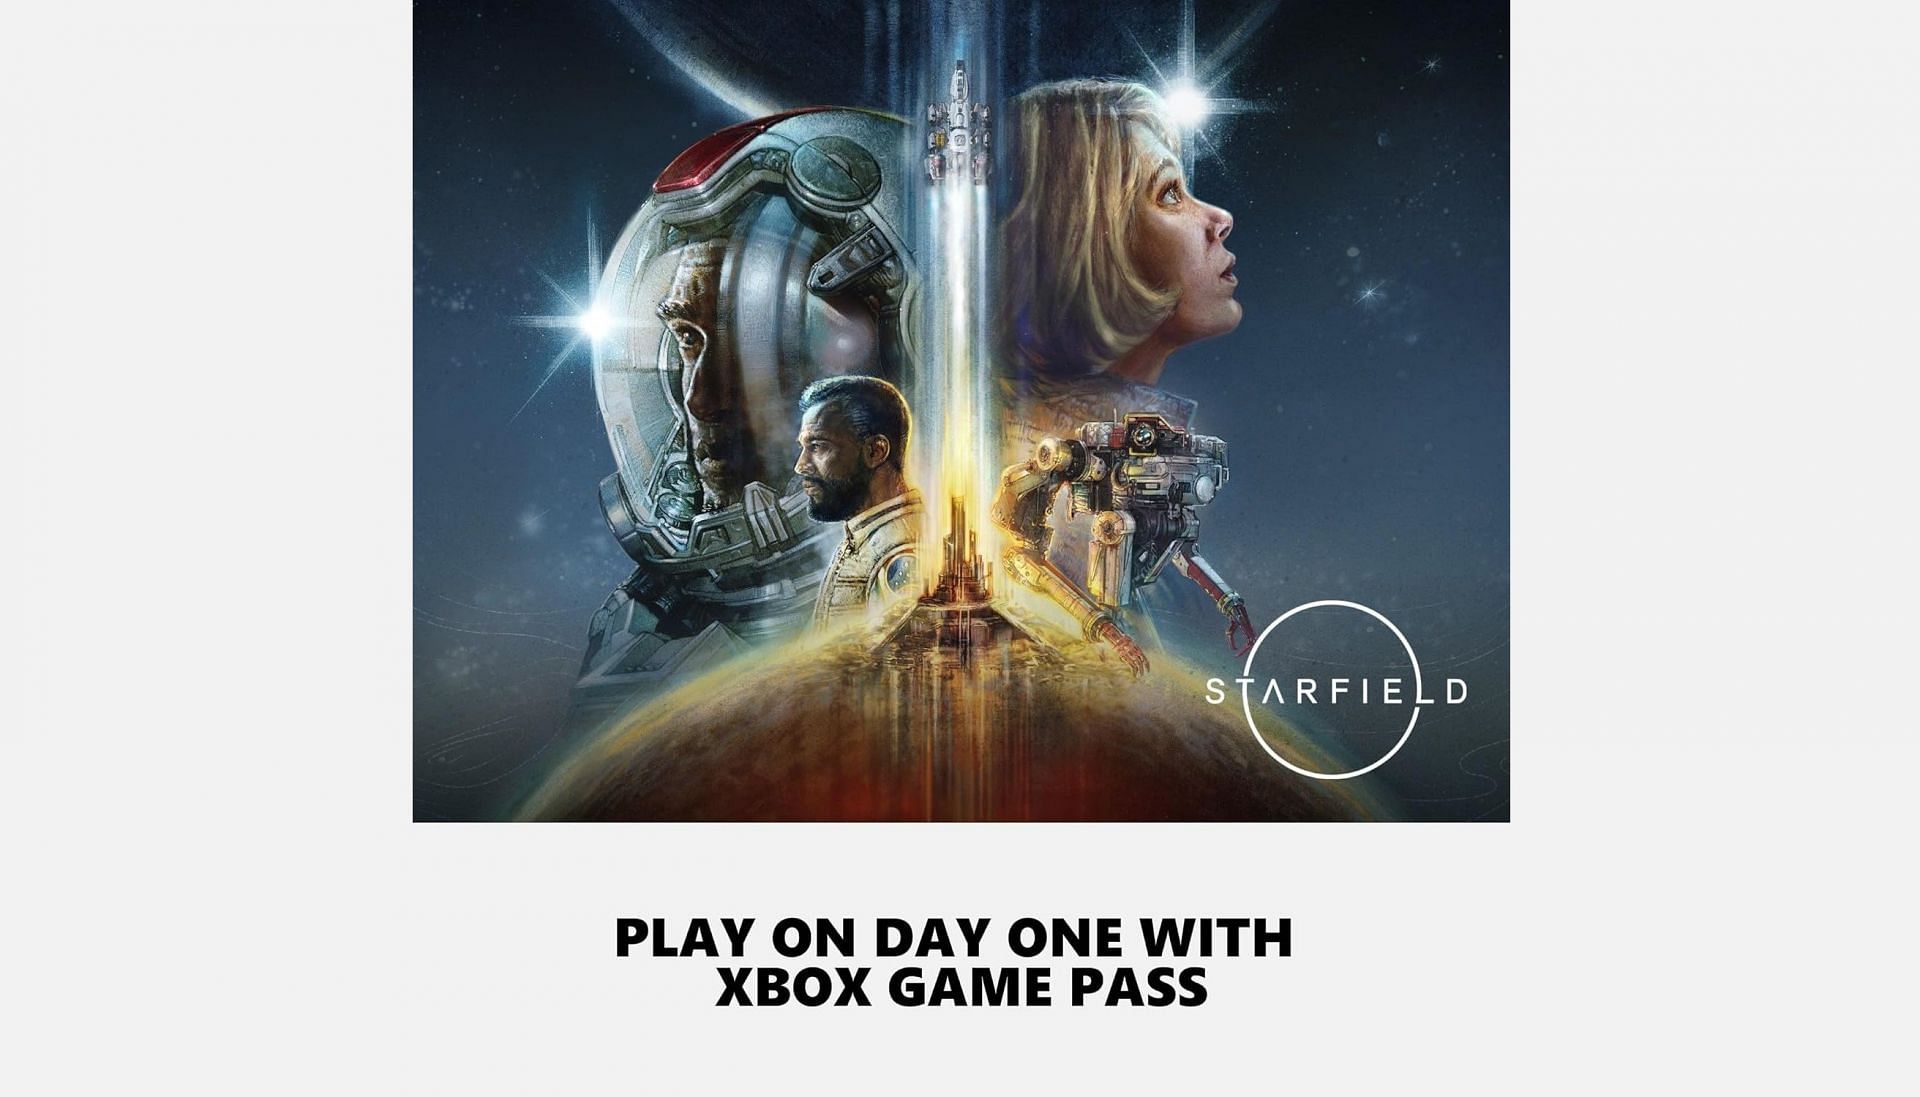 Starfield is available from day one on Xbox Game Pass (Image via Xbox)